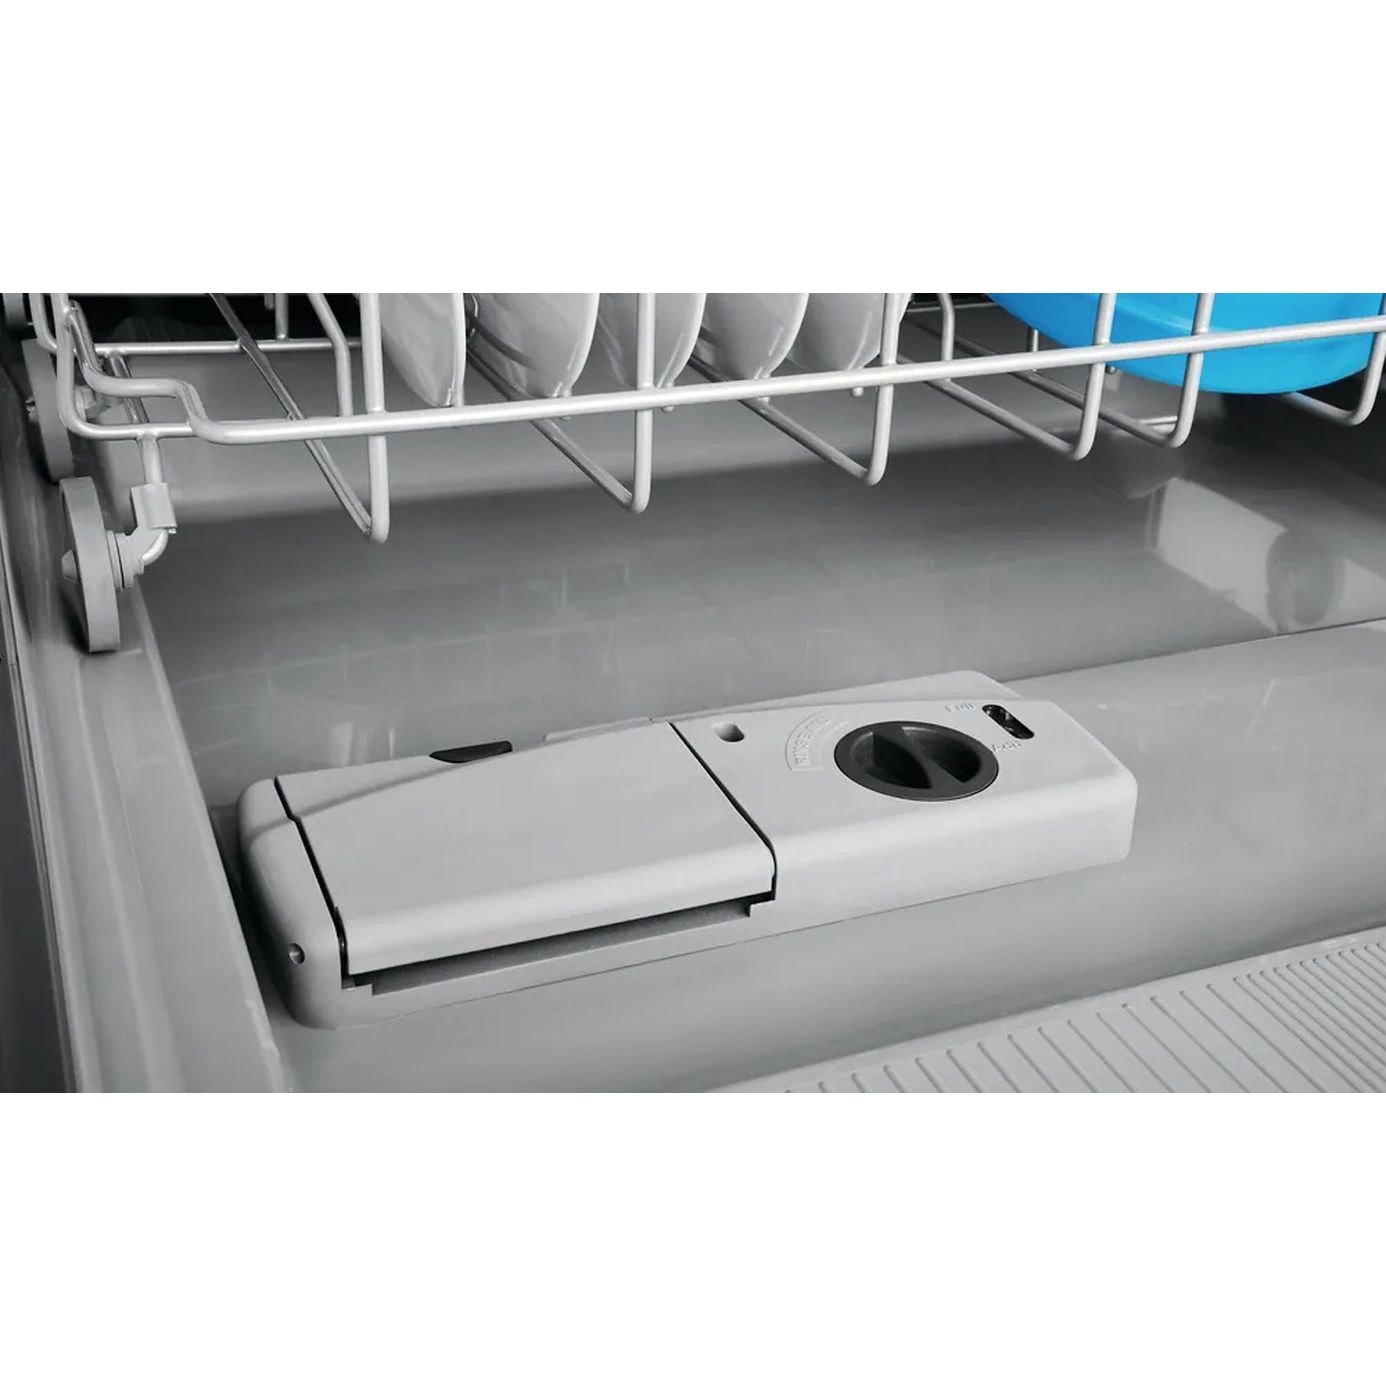 Frigidaire Front Control 24-In Built-In Dishwasher () ENERGY STAR, 55-Dba